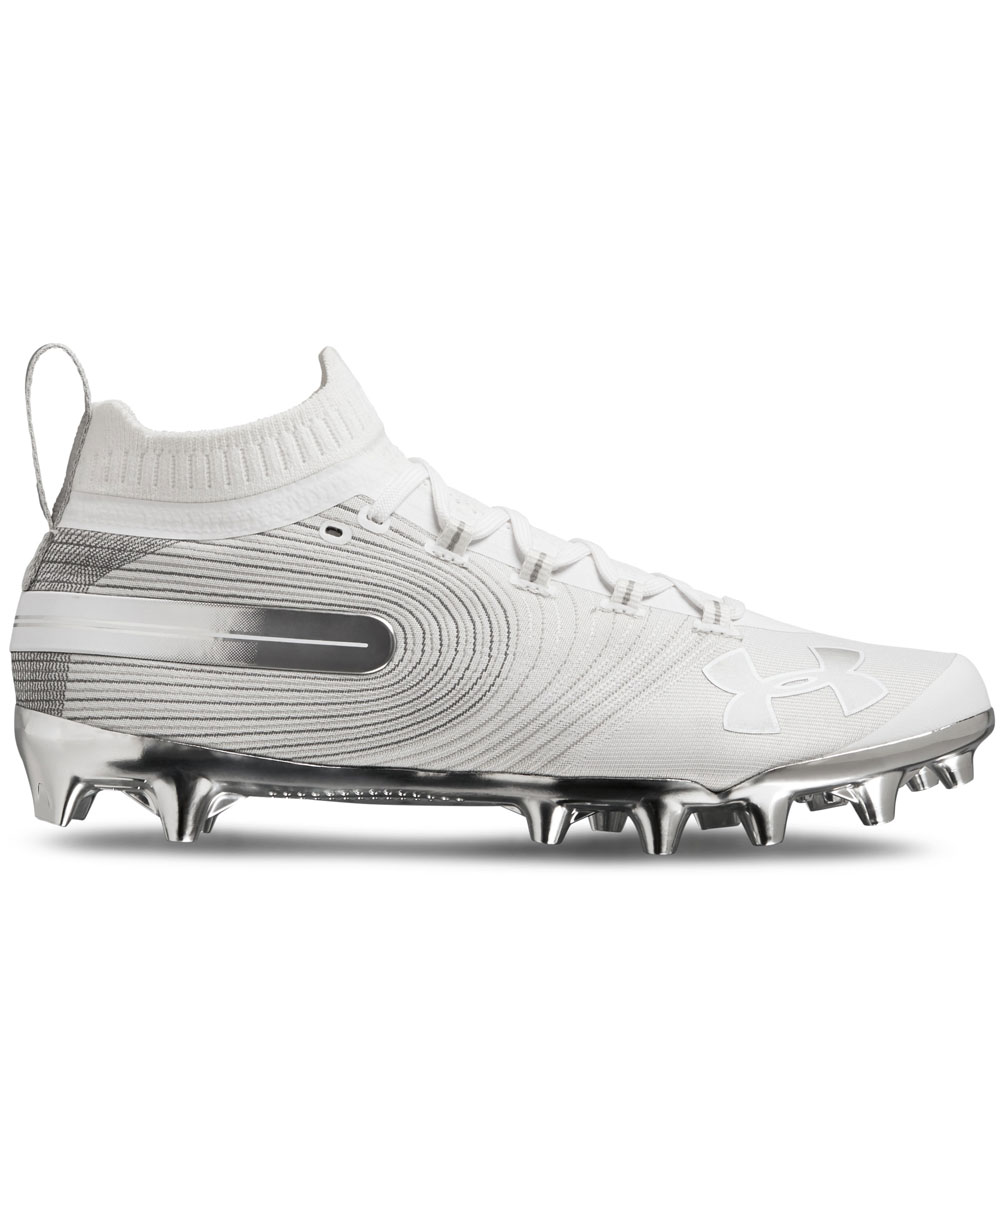 under armour cleats white